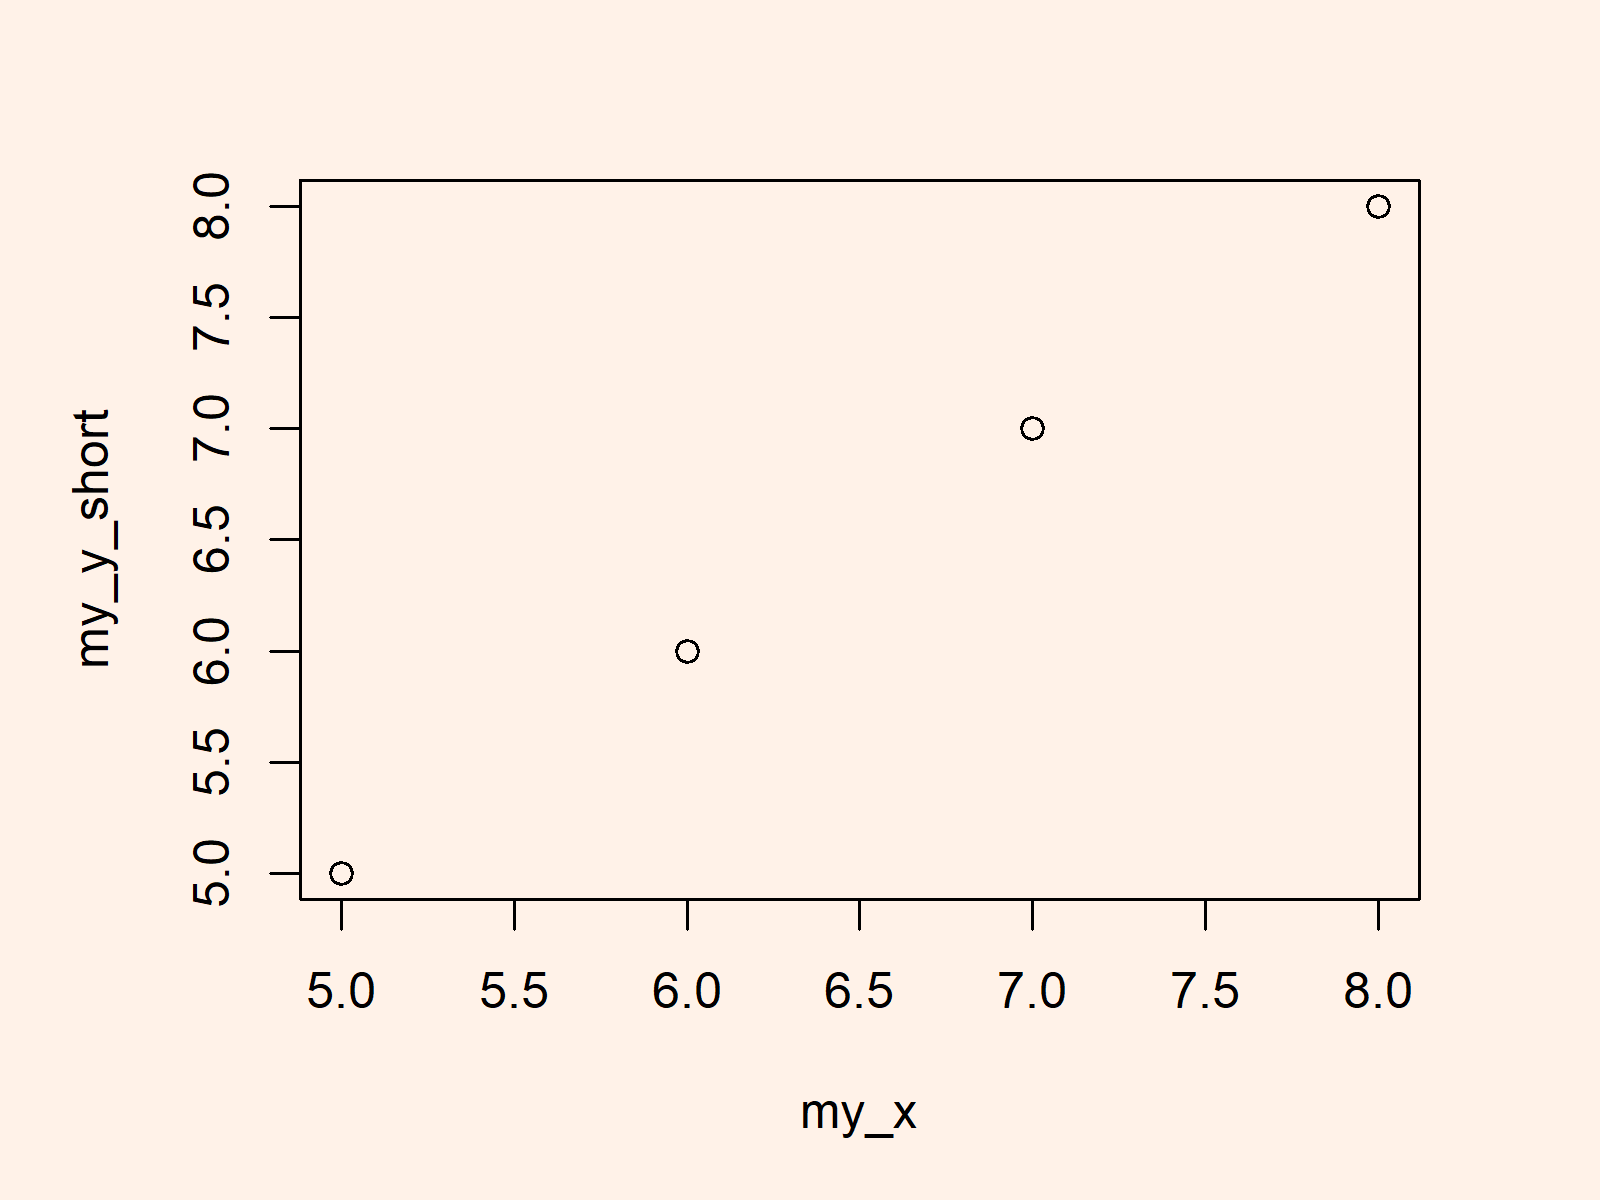 r graph figure 1 r error xy coords x and y length differ